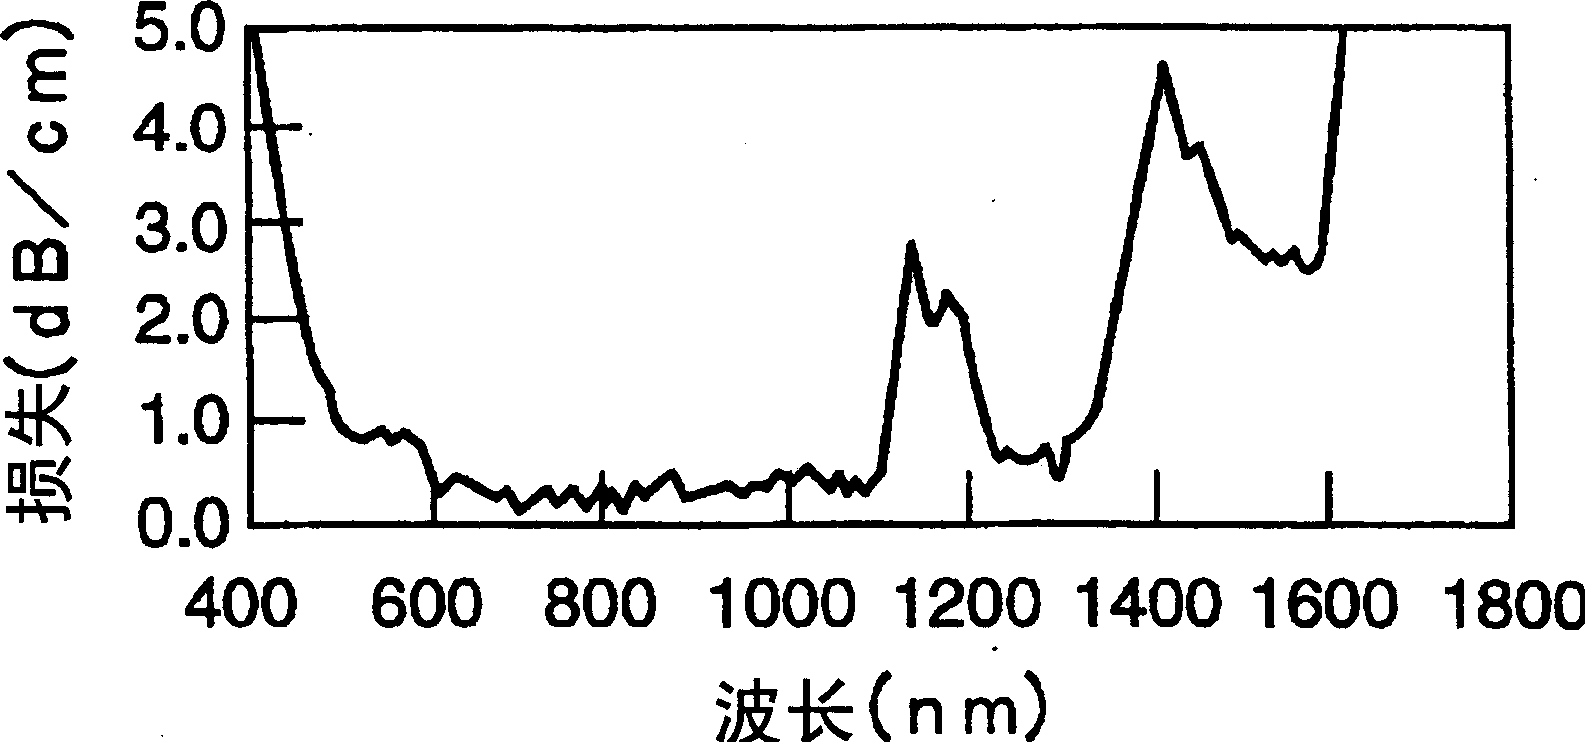 Organometallic polymer material and process for preparing the same